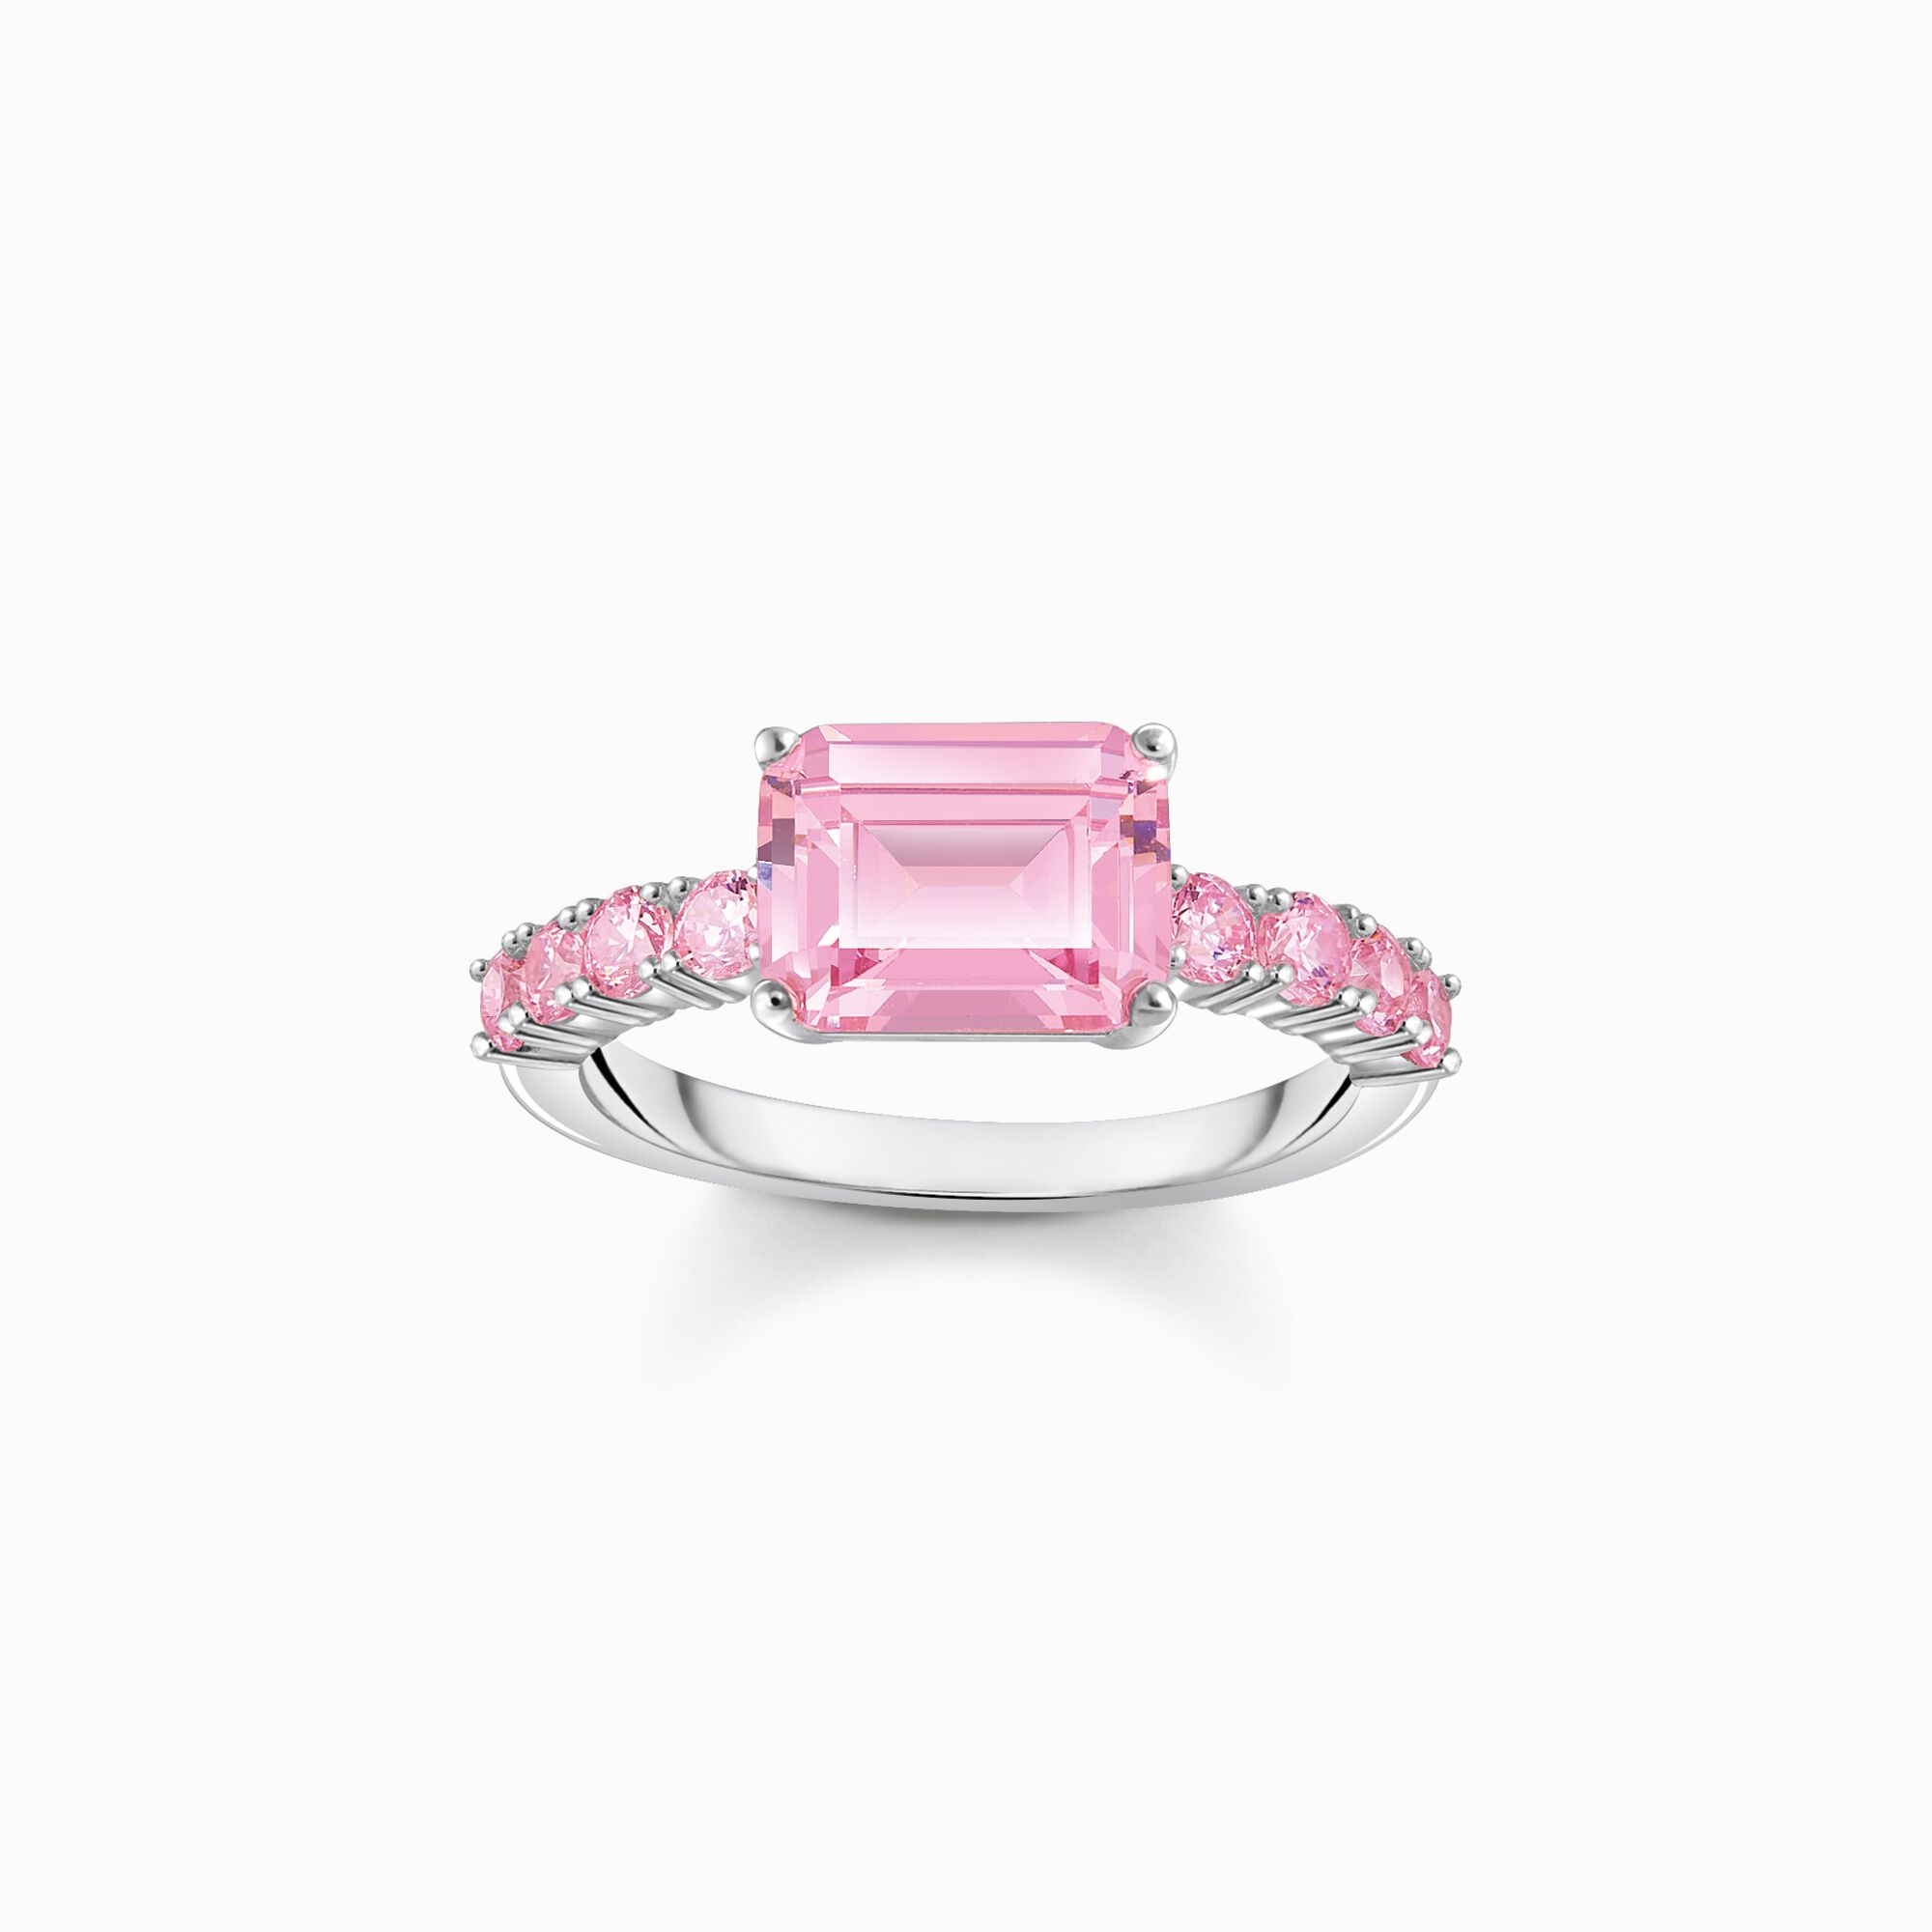 Silver solitaire ring with pink zirconia stones from the  collection in the THOMAS SABO online store